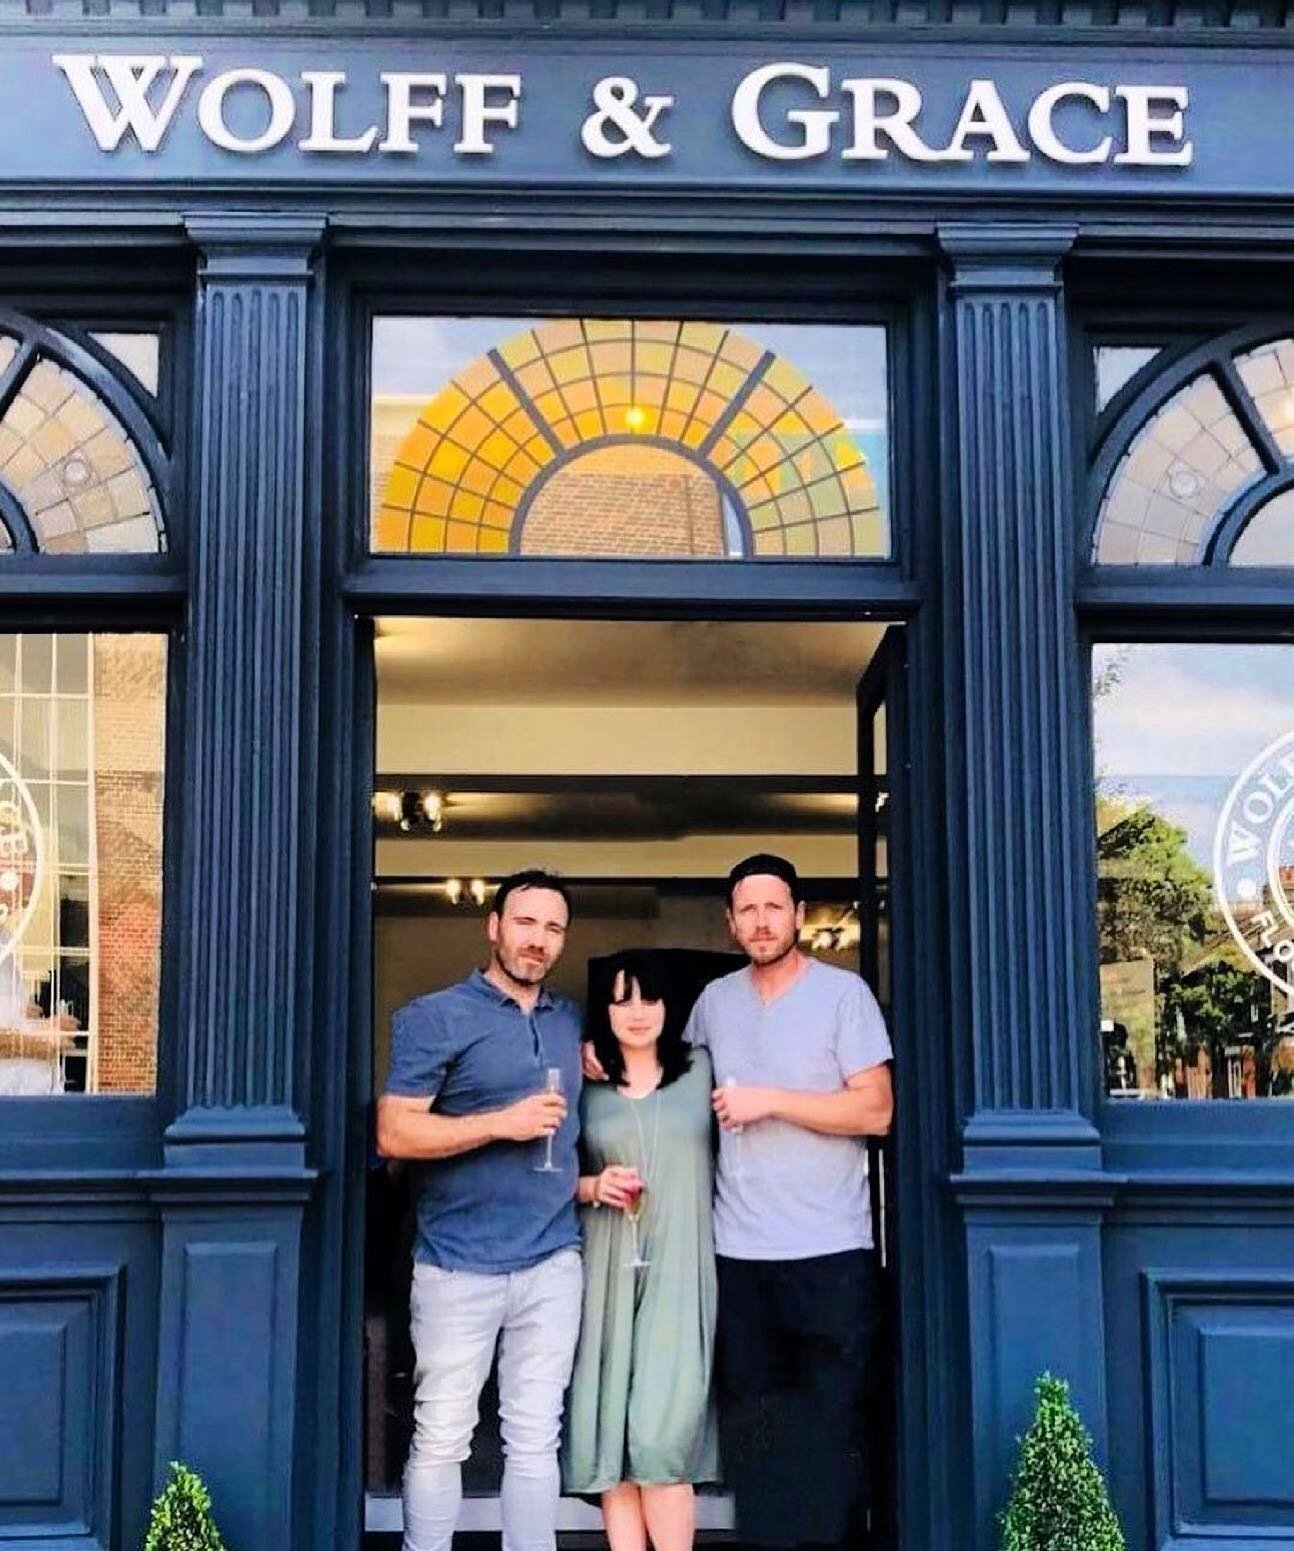 Today is our anniversary!⁣⁣
⁣⁣
It&rsquo;s been just three years since we first opened the doors here at Wolff &amp; Grace and we have loved every minute of it.⁣
⁣⁣
We feel so lucky to be able to work with such high quality brands and it&rsquo;s been 